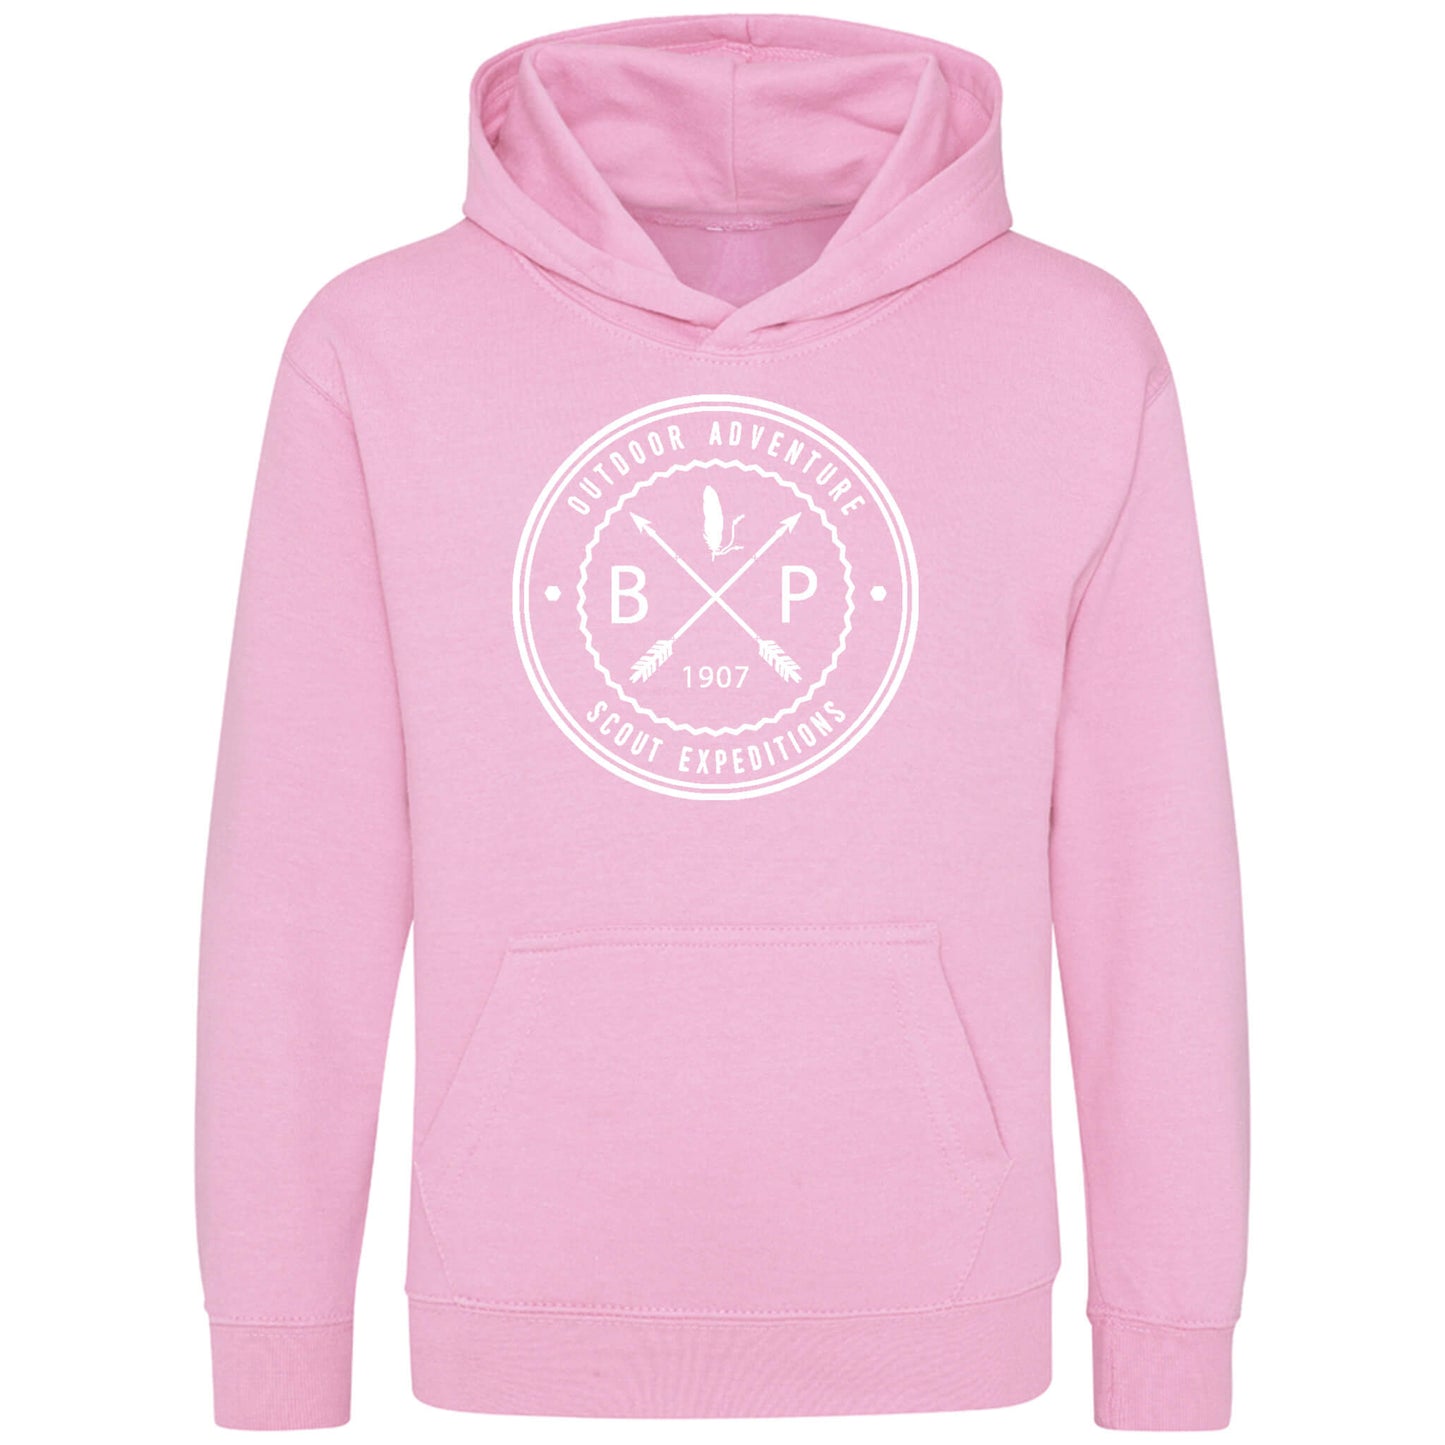 Bp Scouting Expeditions Since 1907 Hoodie pink